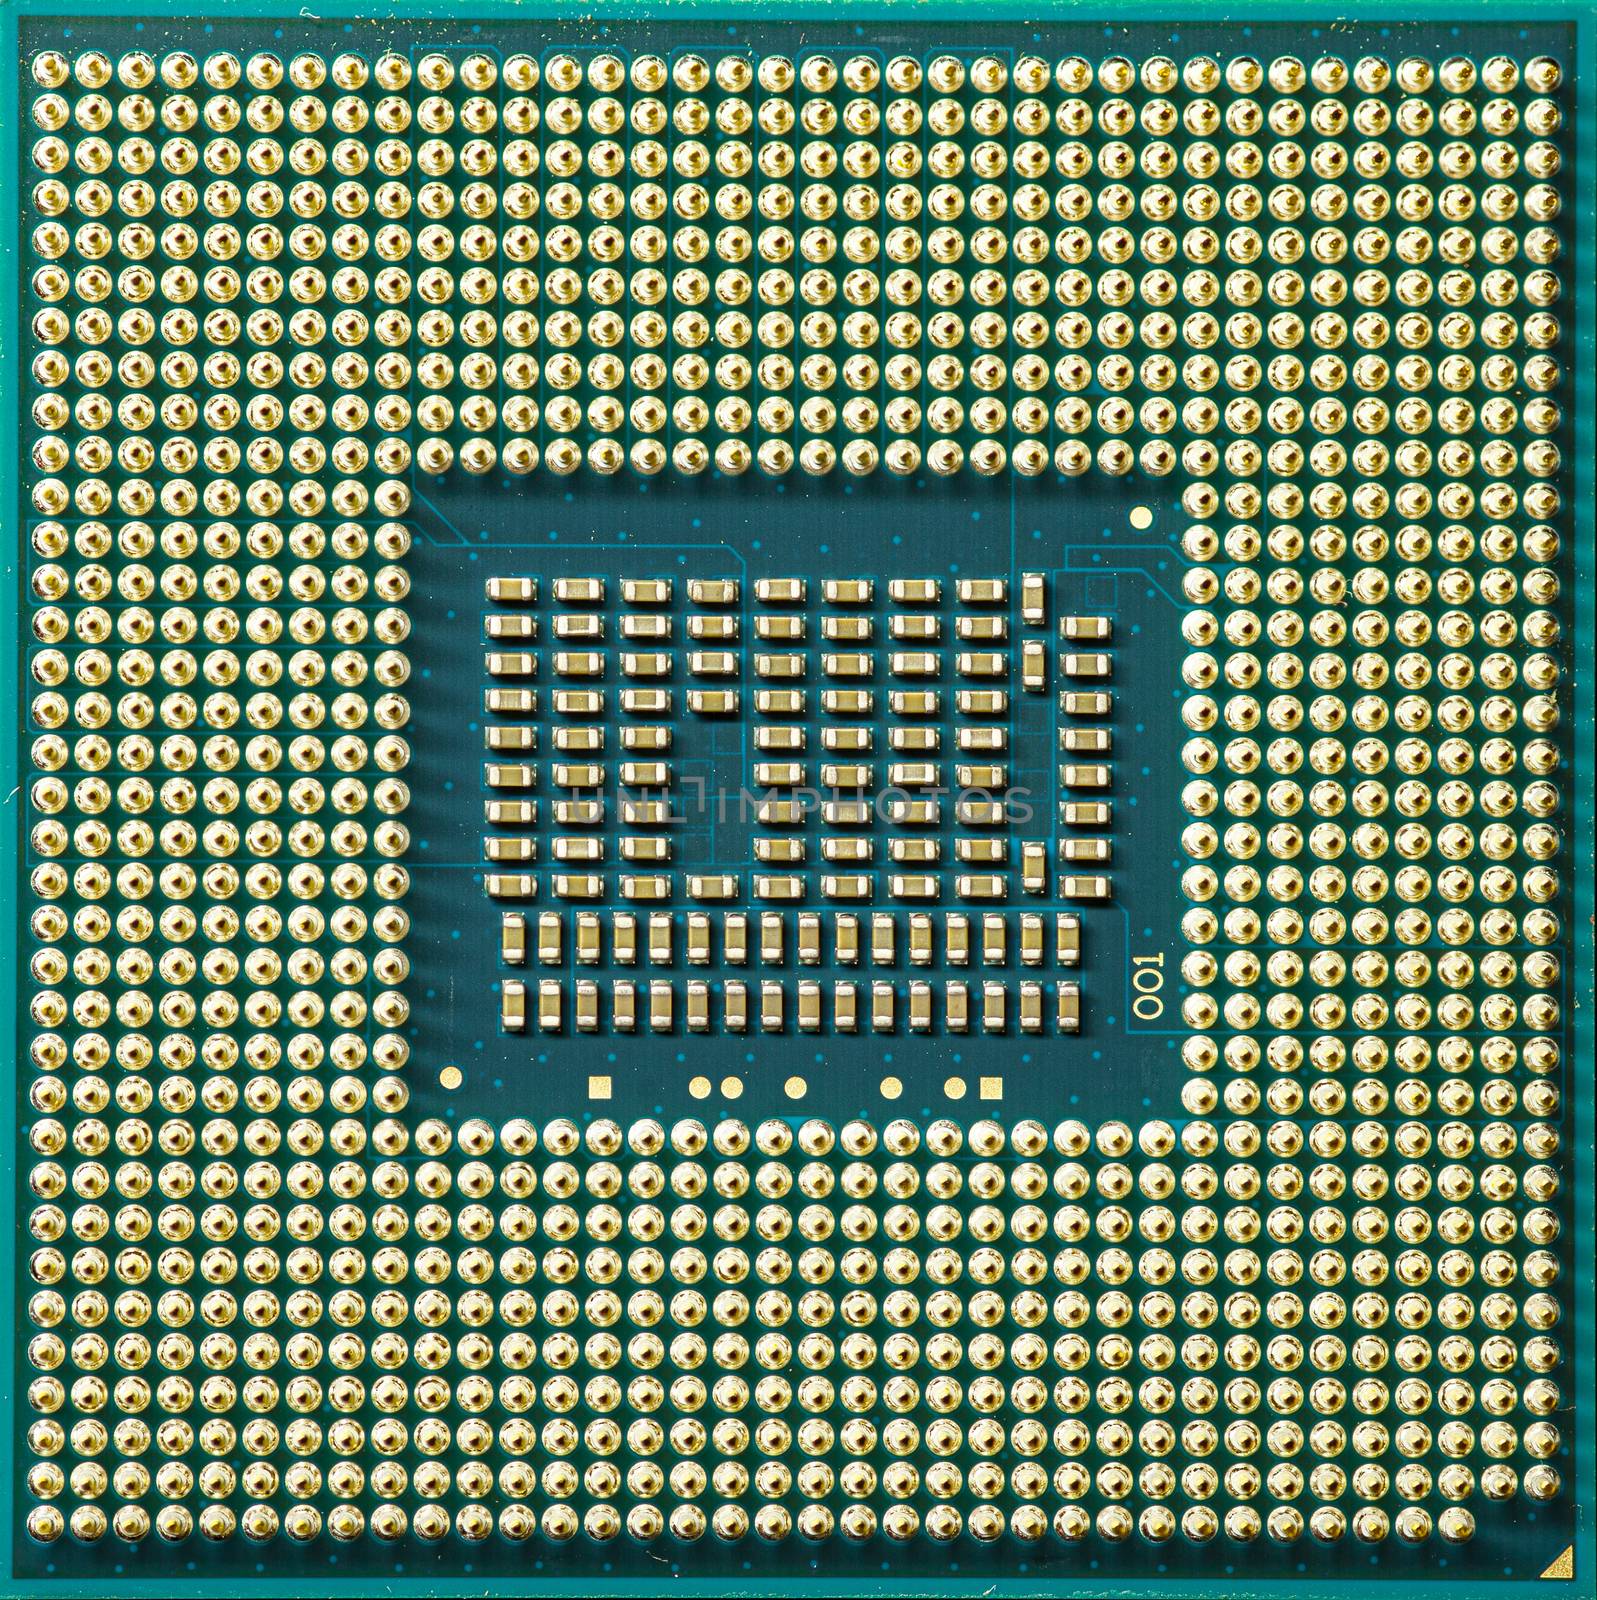 Processor chip detail 5 by pippocarlot